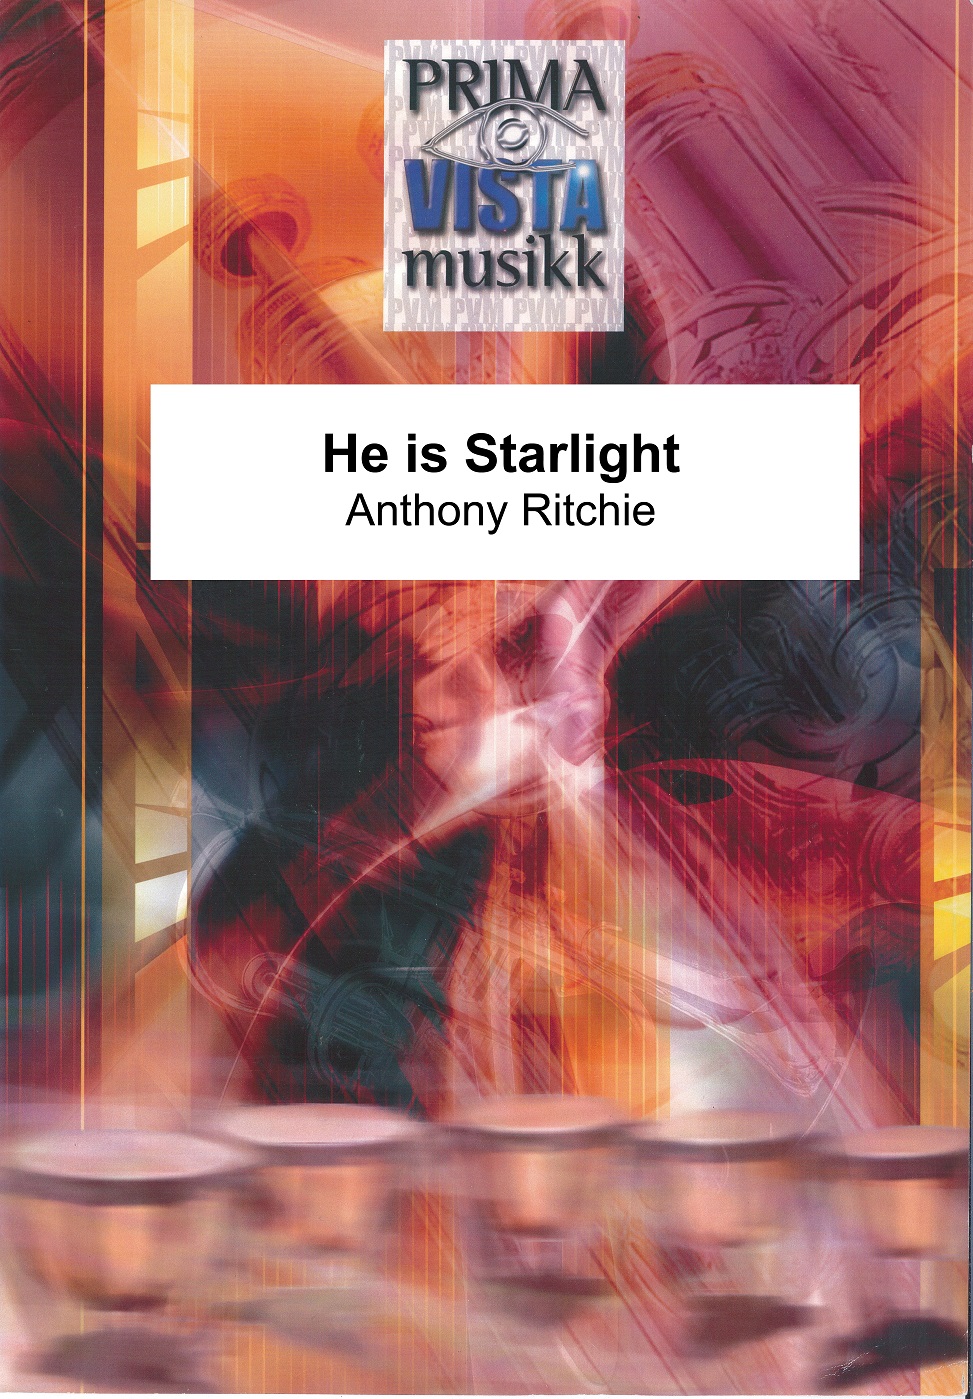 He is Starlight (Score Only)